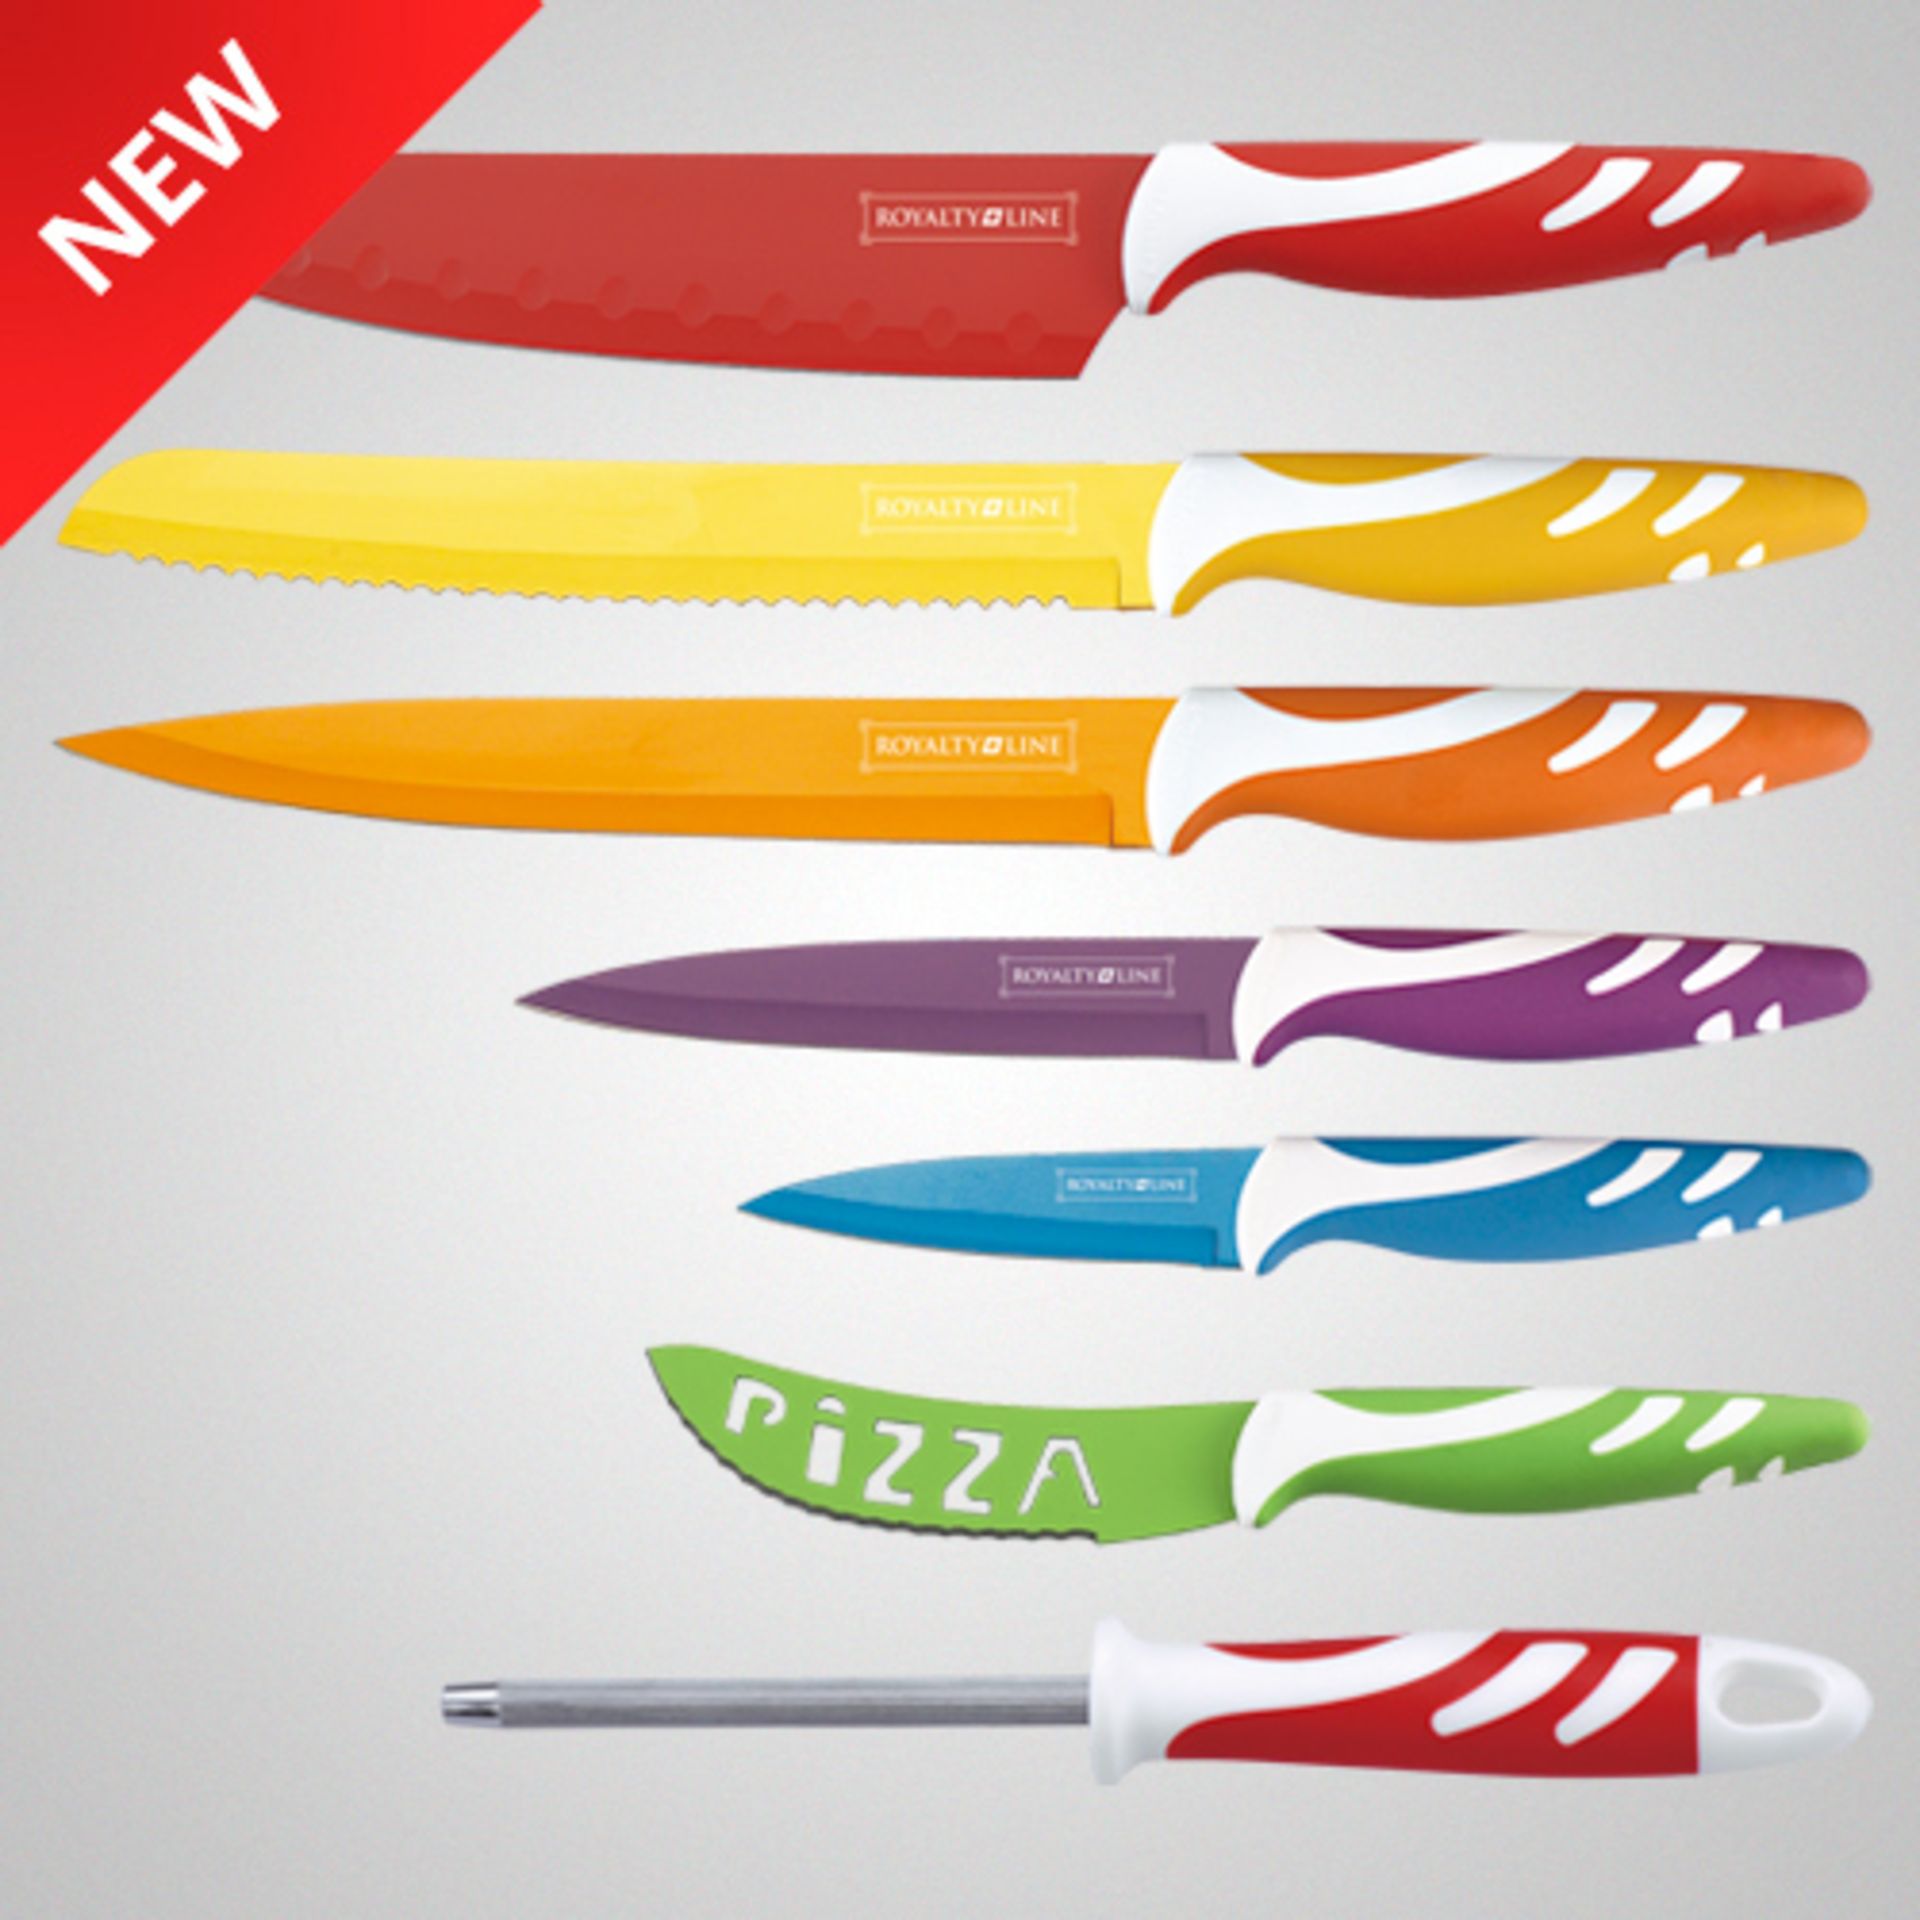 V *TRADE QTY* Brand New 8 Piece Non-Stick Coated Coloured Knife Set RRP169.00 Euros X100 Bid price